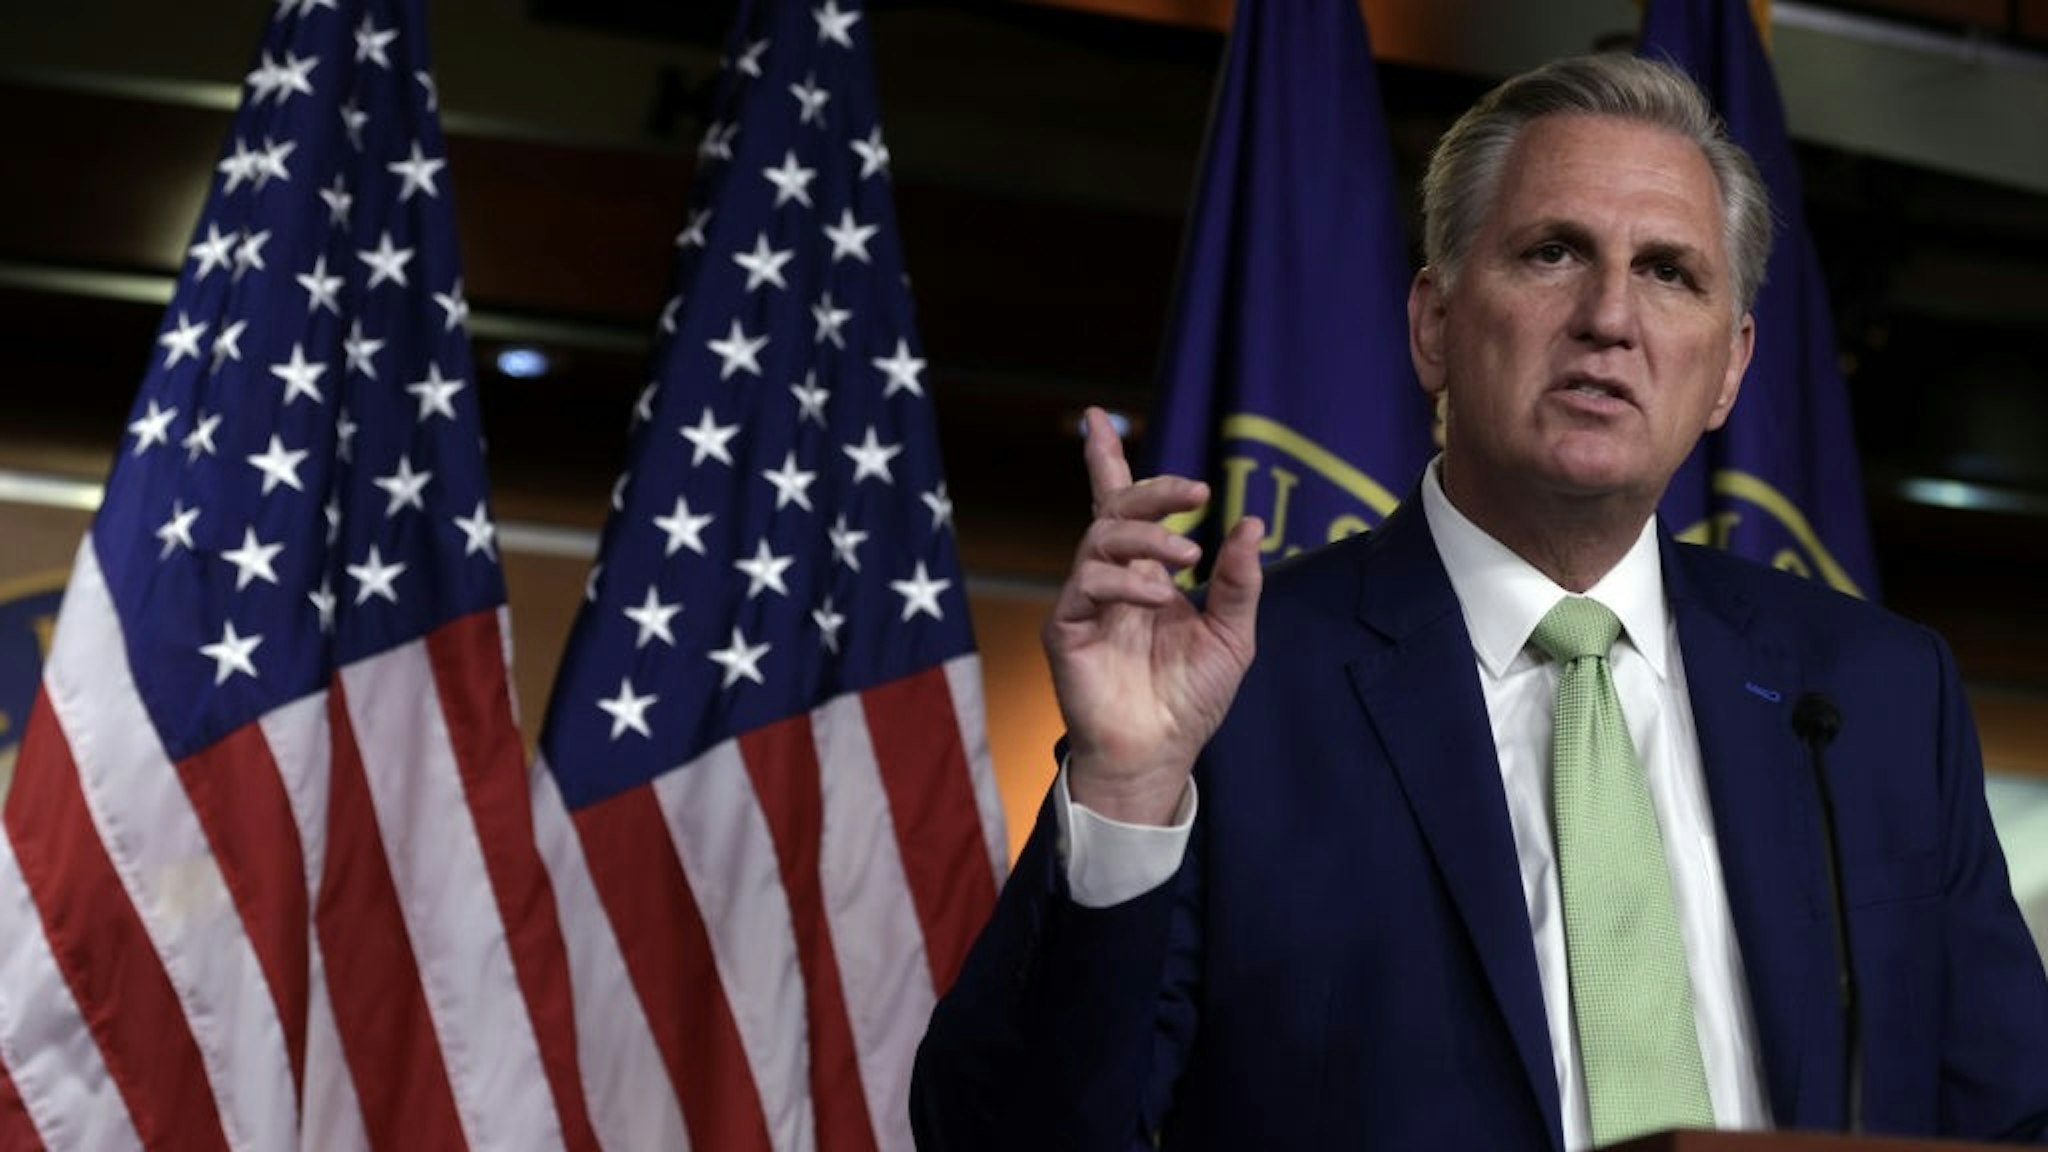 WASHINGTON, DC - APRIL 15: U.S. House Minority Leader Rep. Kevin McCarthy (R-CA) speaks during a weekly news conference at the U.S. Capitol April 15, 2021 in Washington, DC. Leader McCarthy held his weekly news conference to answer questions from members of the press. (Photo by Alex Wong/Getty Images)